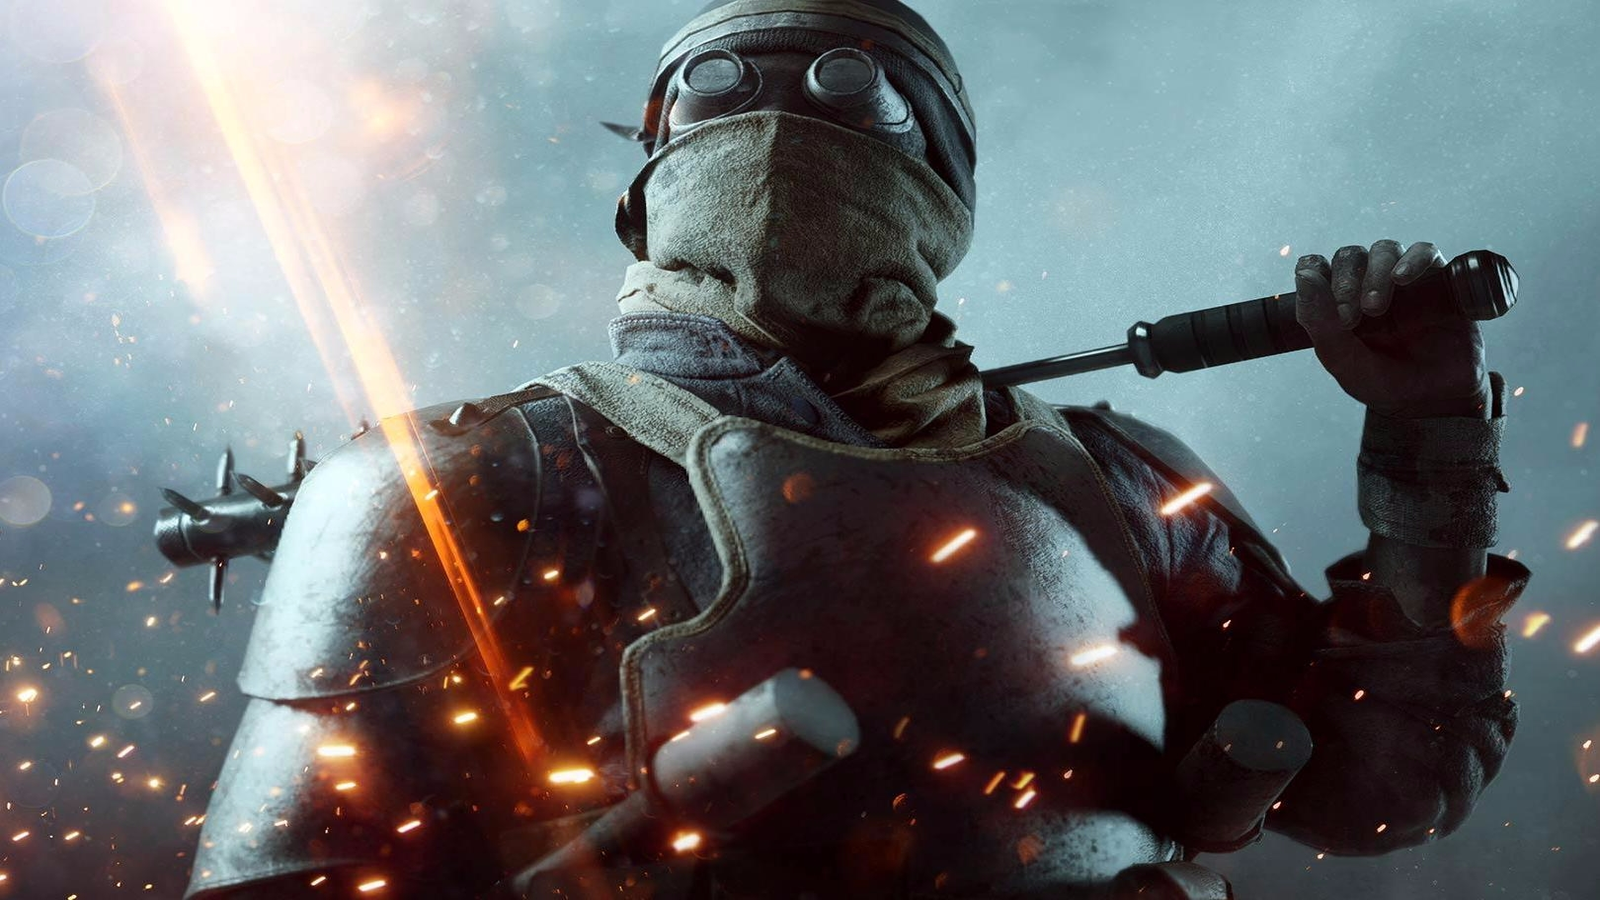 Things to Do First In Battlefield 1 Multiplayer - Battlefield 1 Guide - IGN